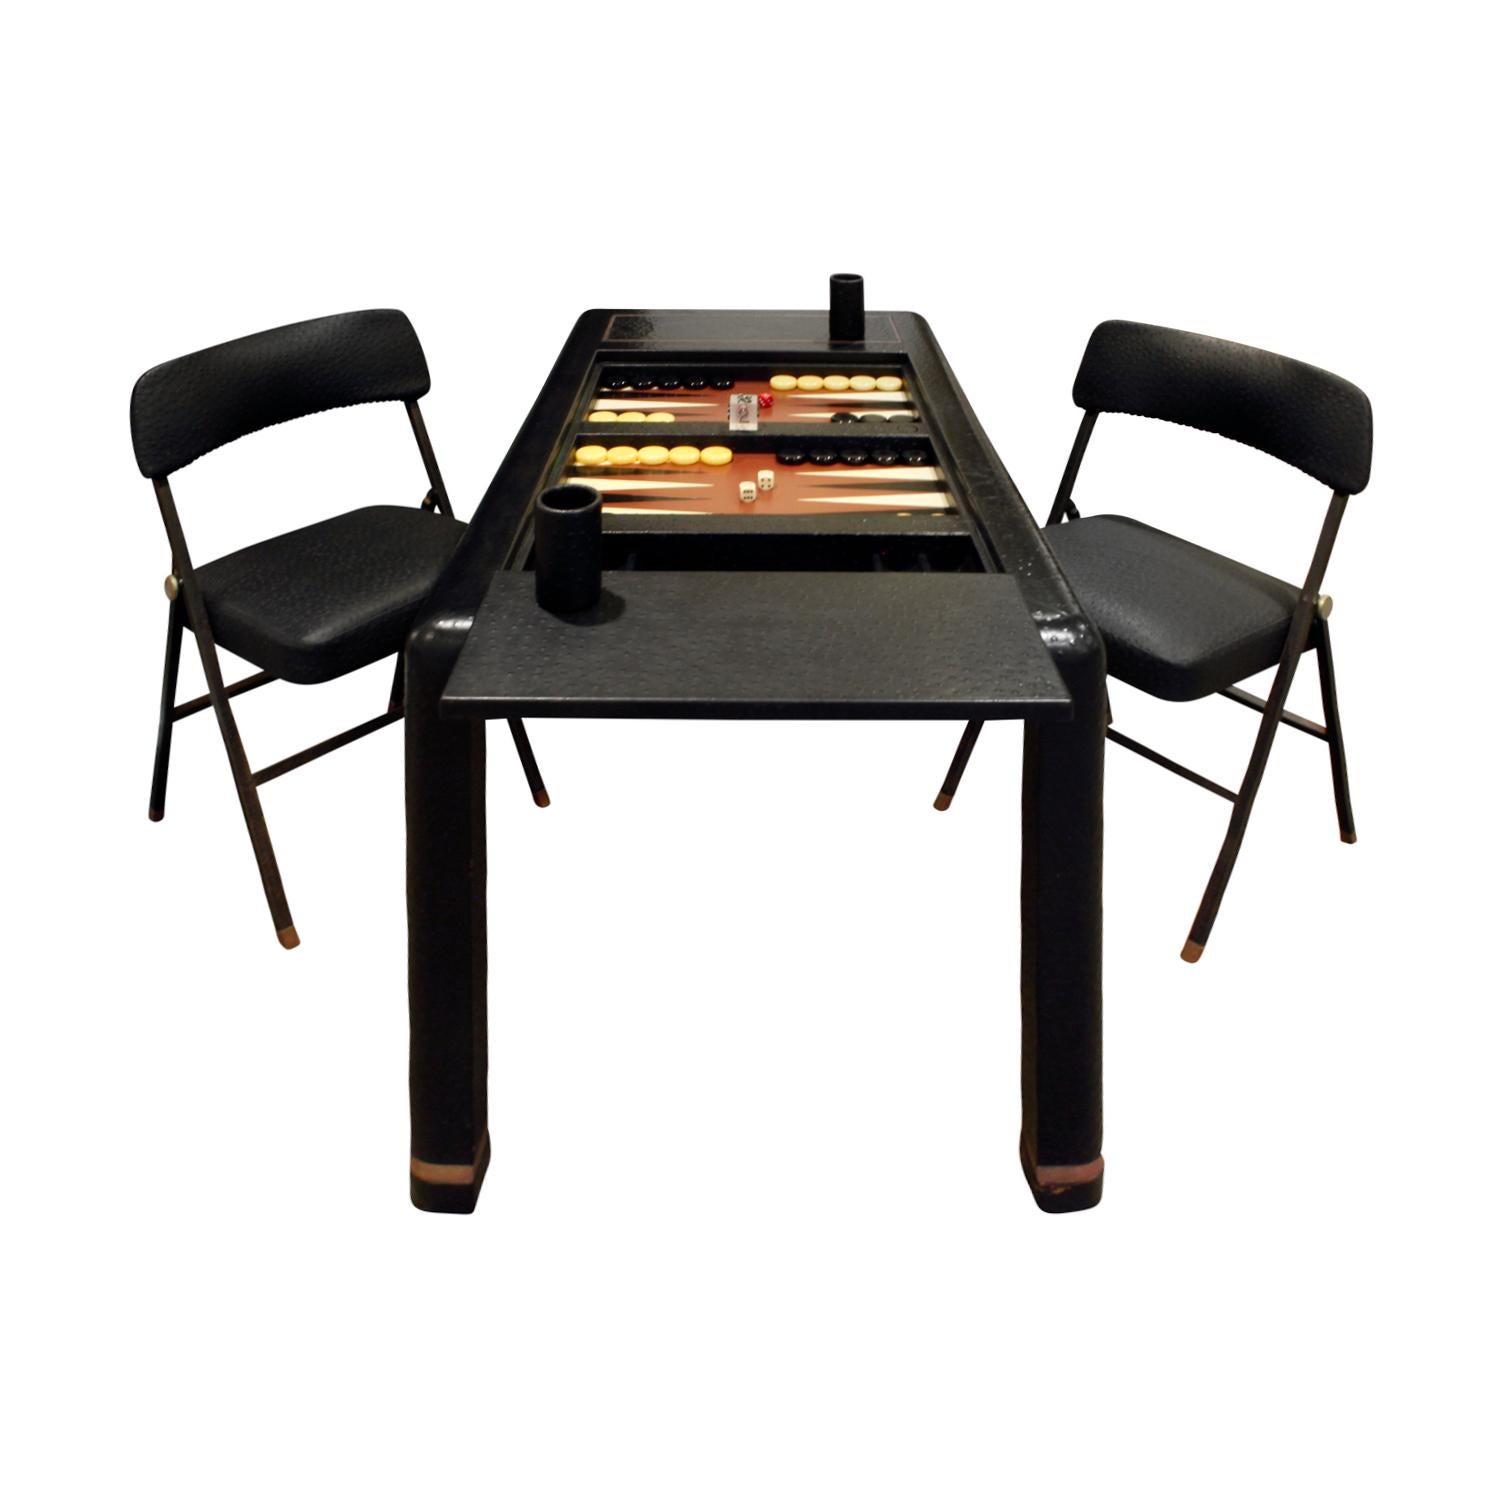 Backgammon table in ostrich skin with brass banding and matching folding chairs in embossed ostrich leather by Karl Springer, American 1970s (signed on bottom with a paper label that reads “Karl Springer”). Game table in leather with original game